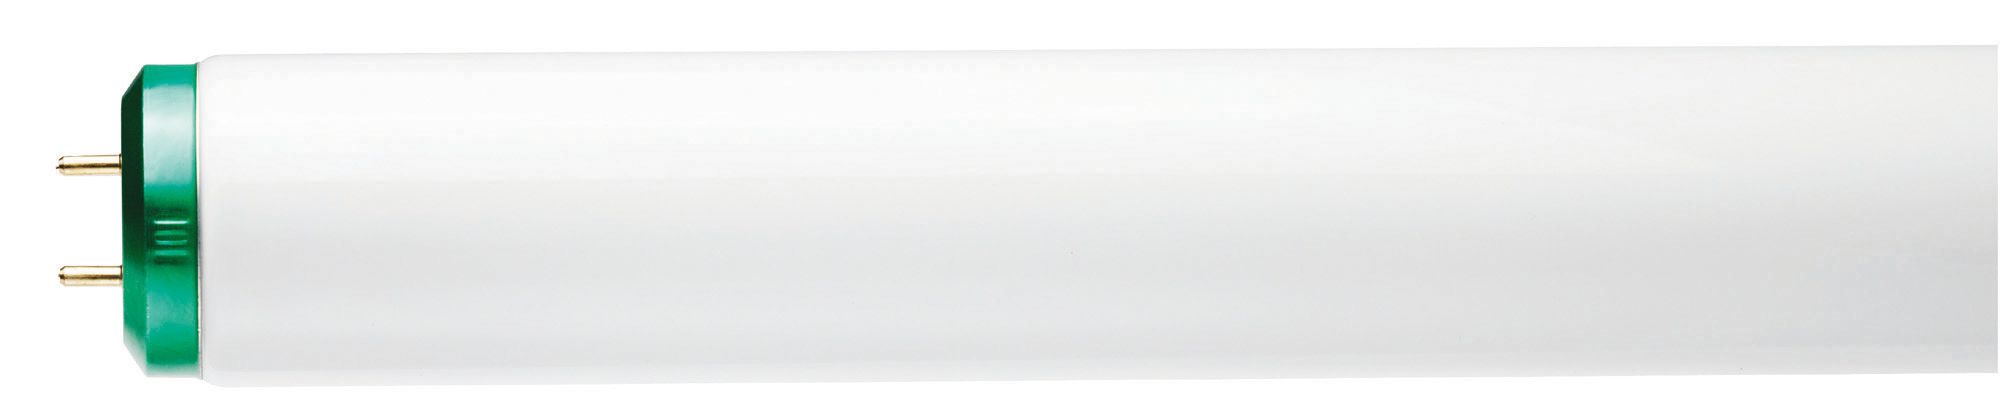 423889 Linear Compact Fluorescent Lamp Philips Lighting;Signify Lamps